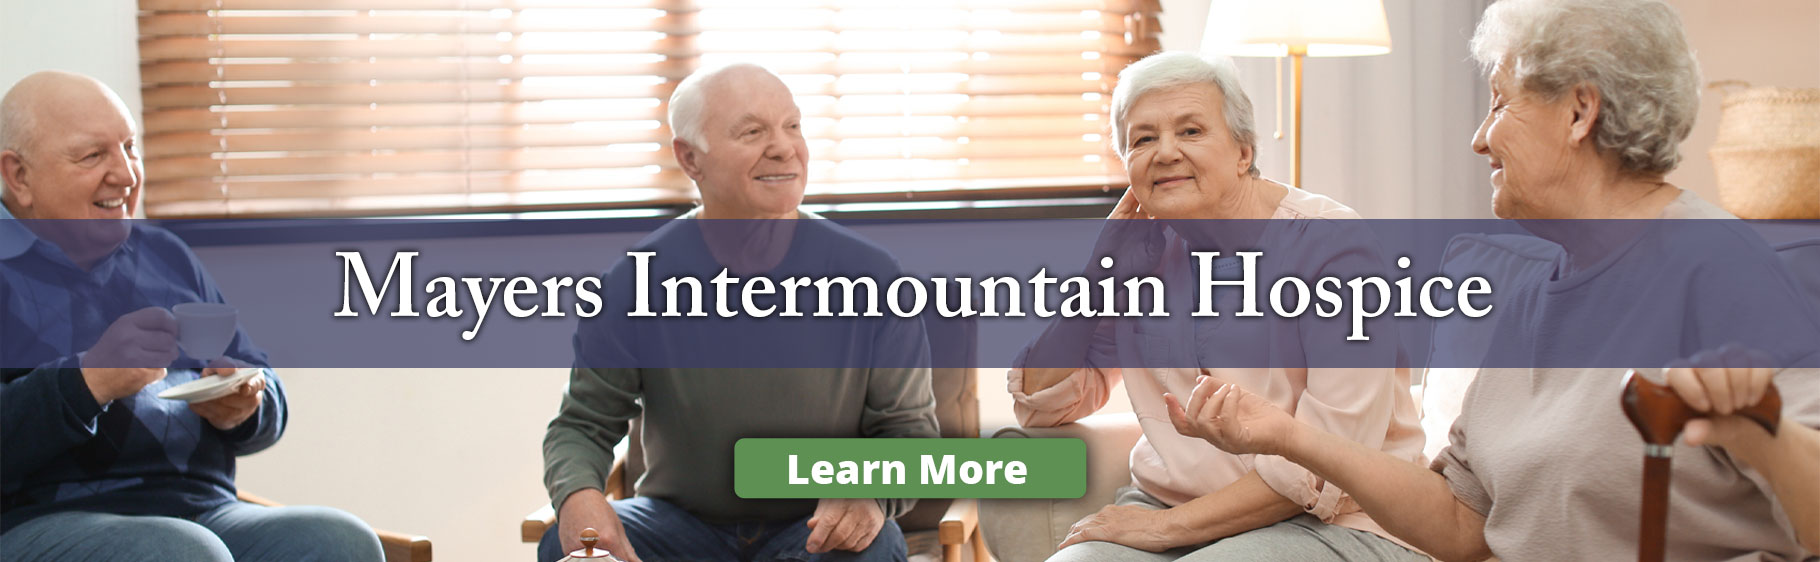 Mayers Intermountain Hospice 
(Click here for more info)